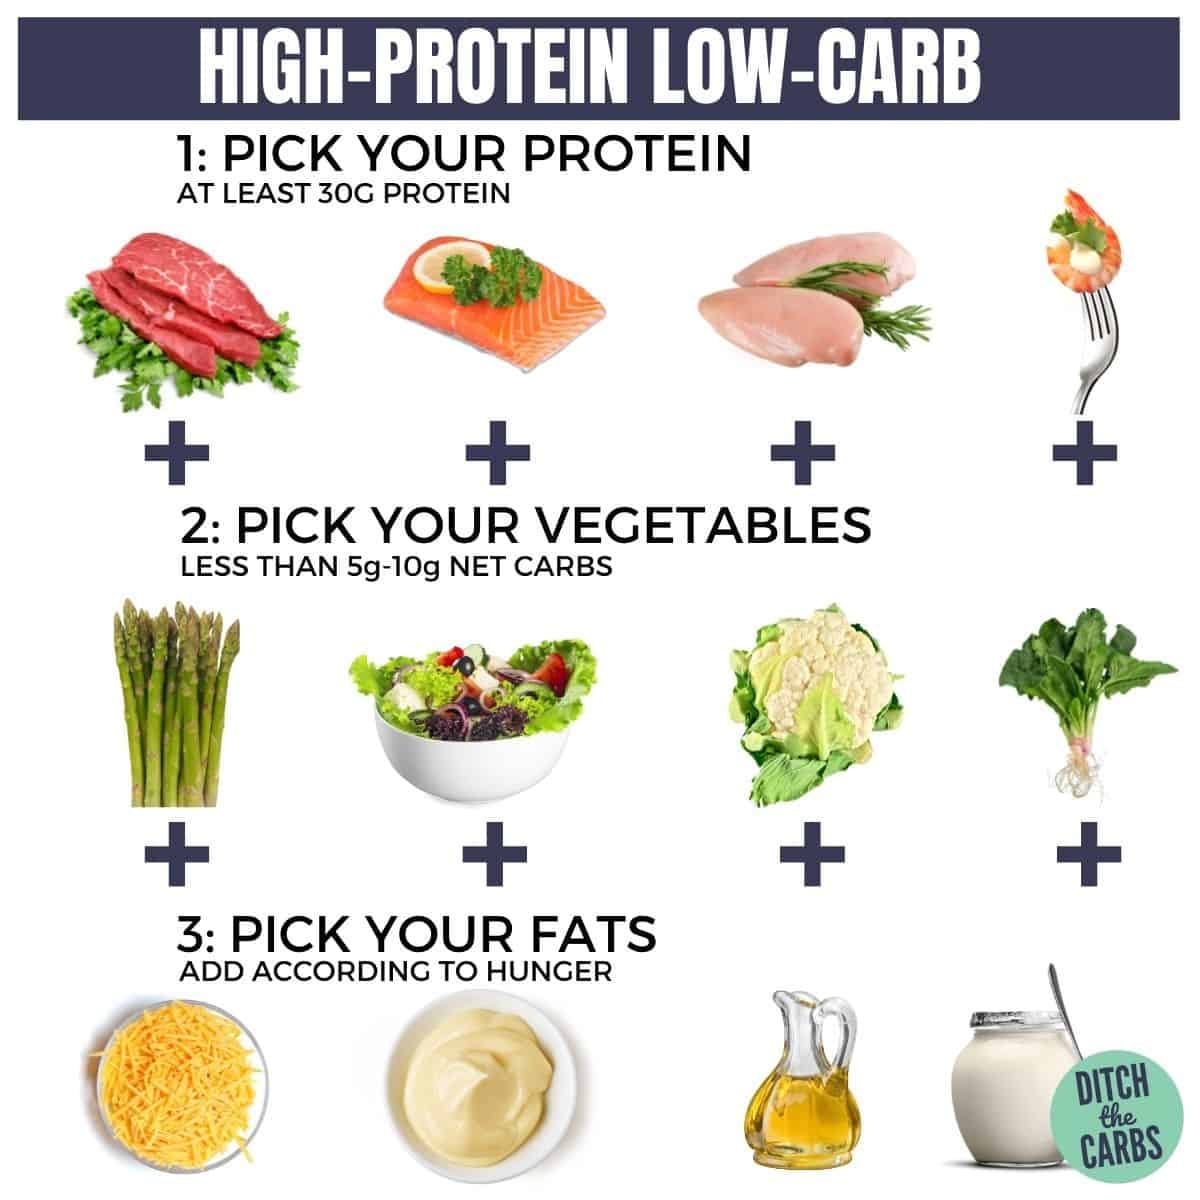 High-Protein Low-Carb Diet (How Much Protein Do You Need?)